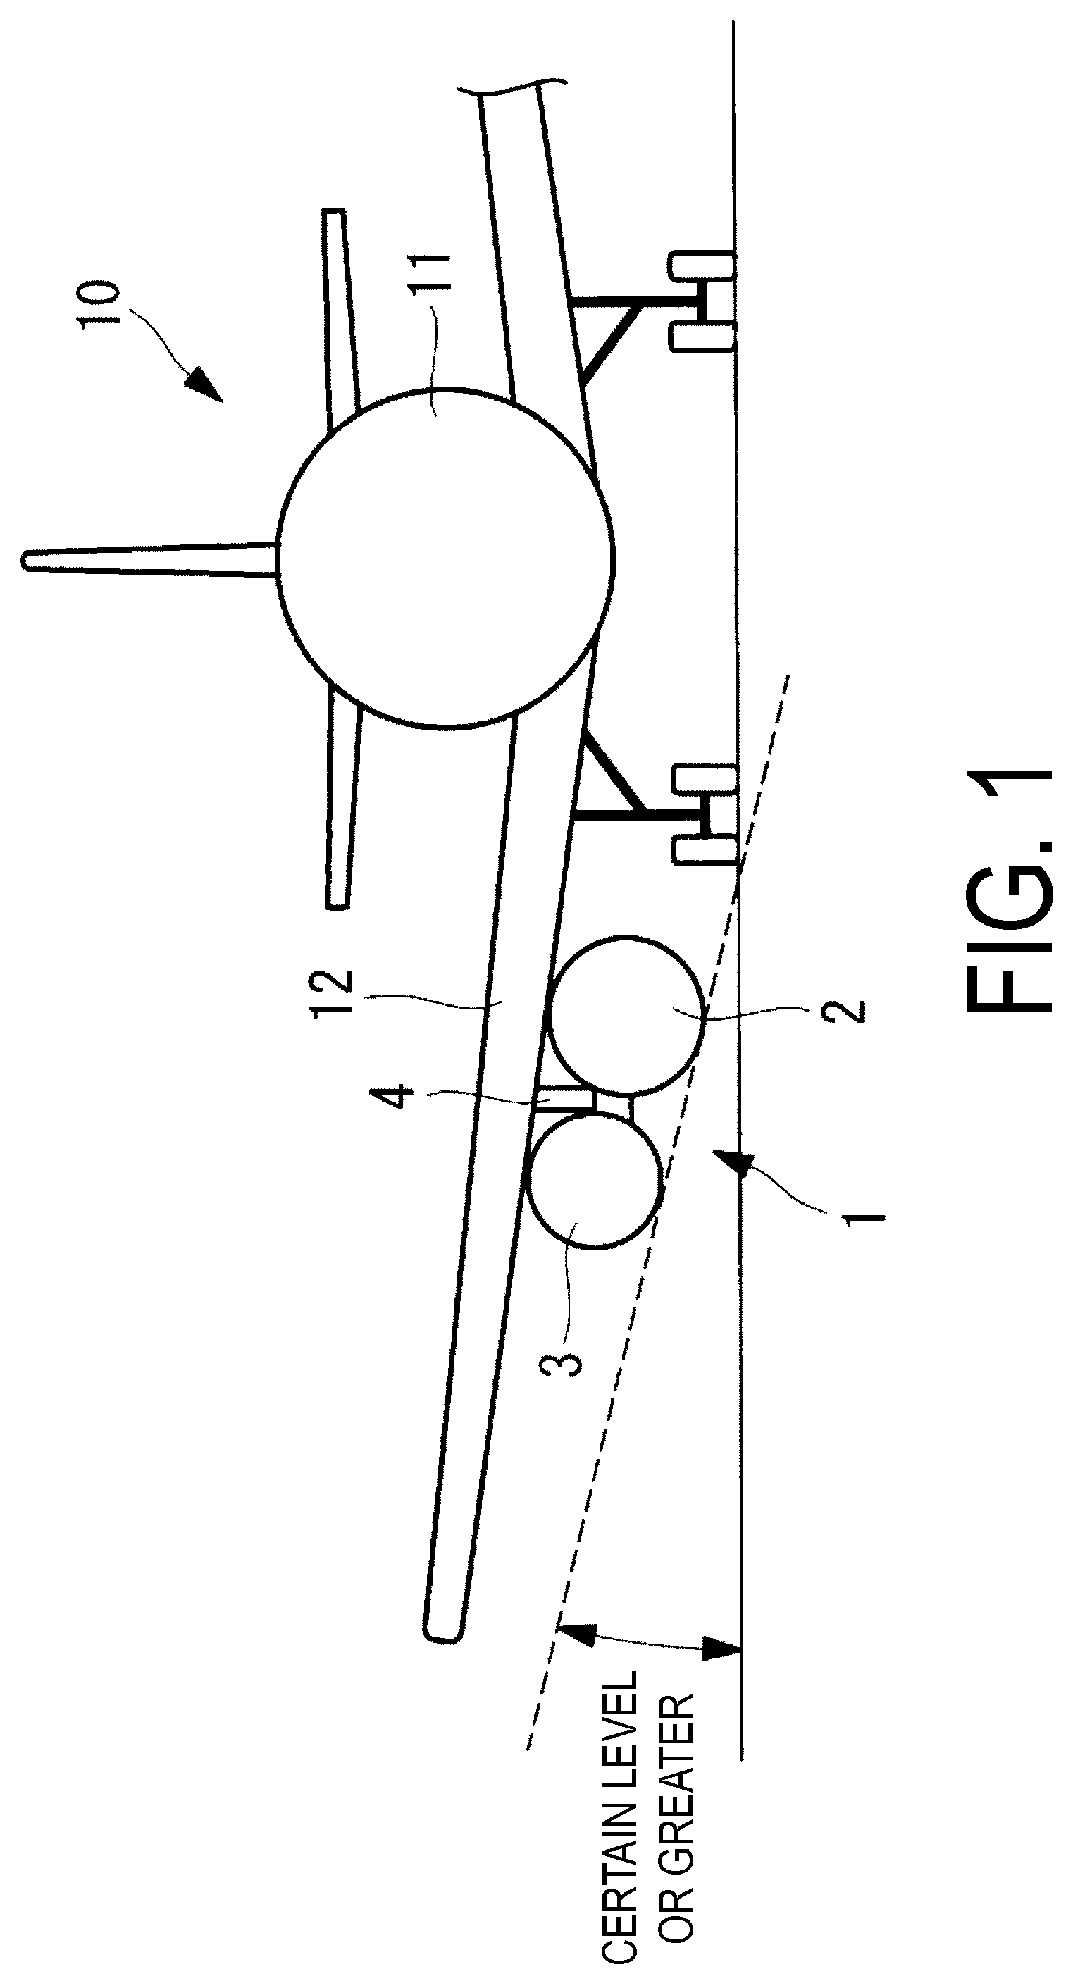 Thrust force generation device and aircraft